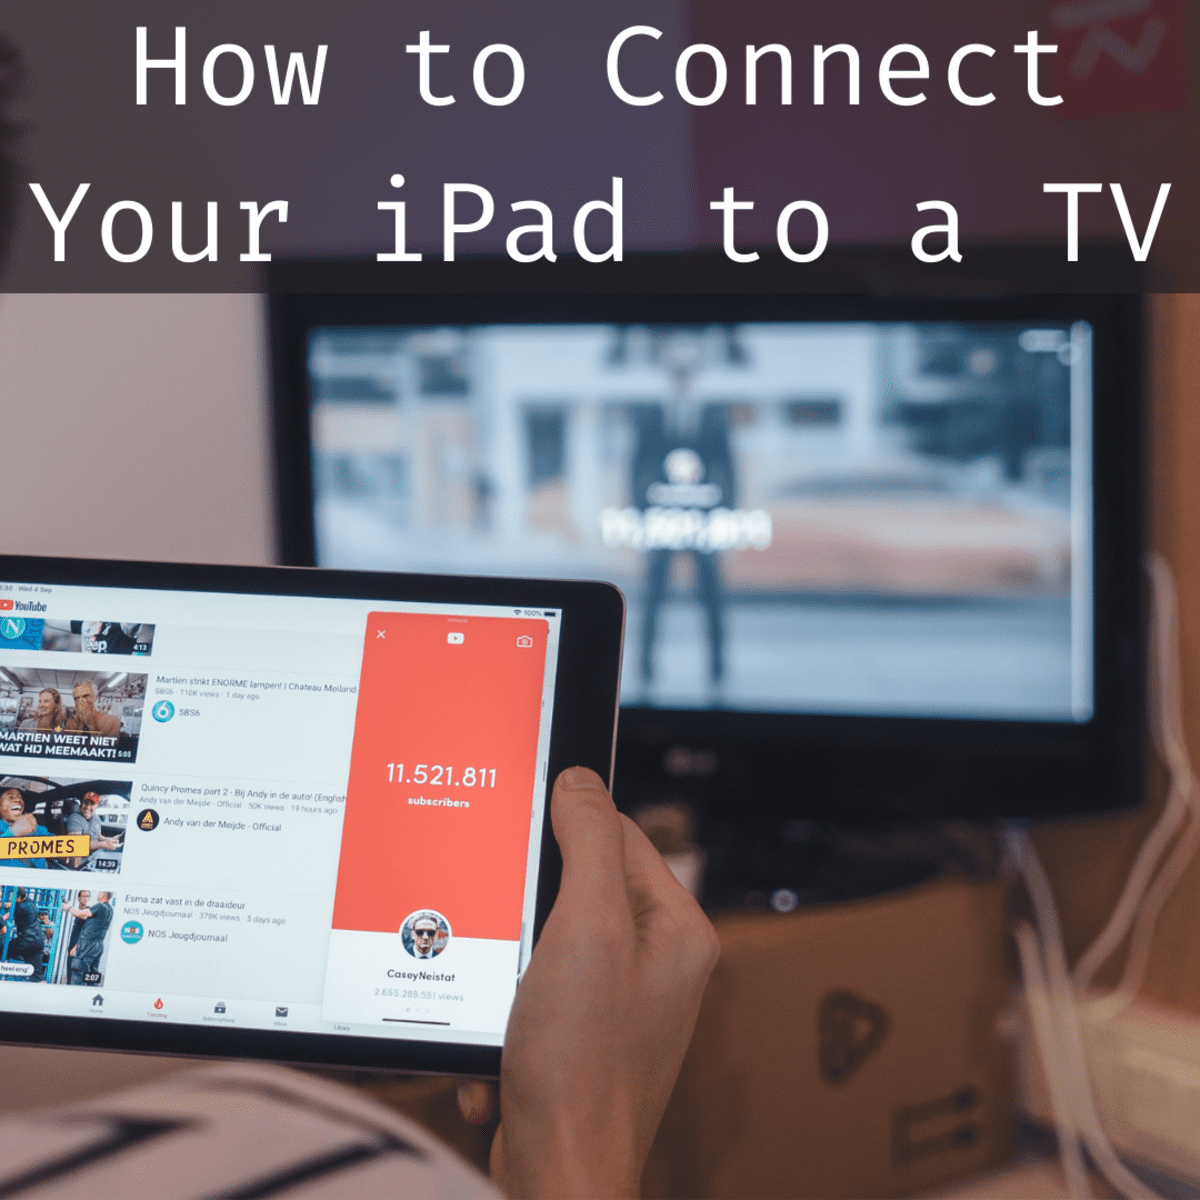 How To Connect An Ipad Tv With Hdmi, Can You Mirror Ipad To Tv Without Wifi